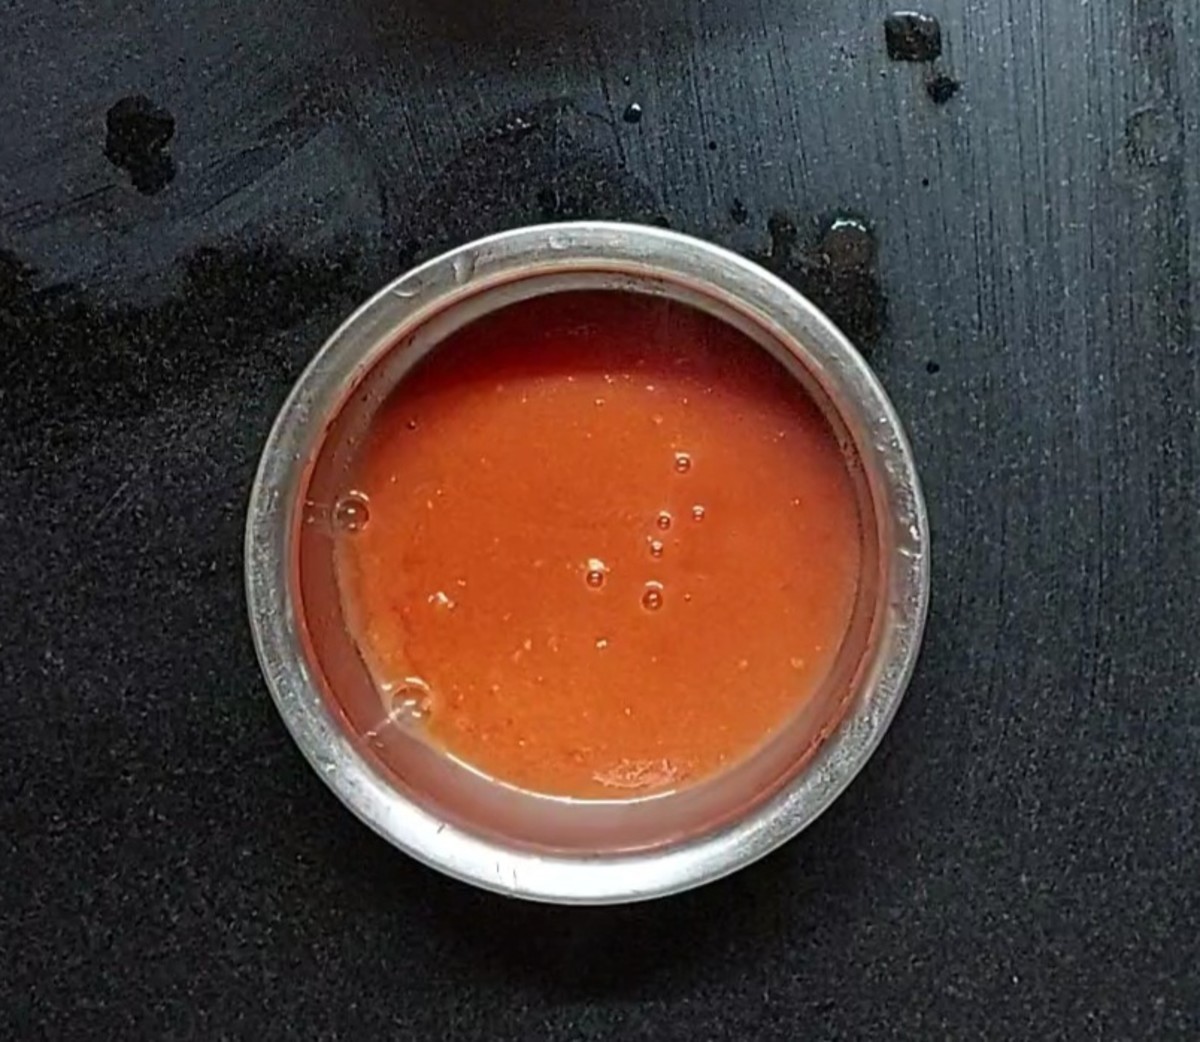 Transfer the peeled tomatoes to a mixer jar, close the lid and grind to a smooth paste. Tomato puree is ready. Set aside.